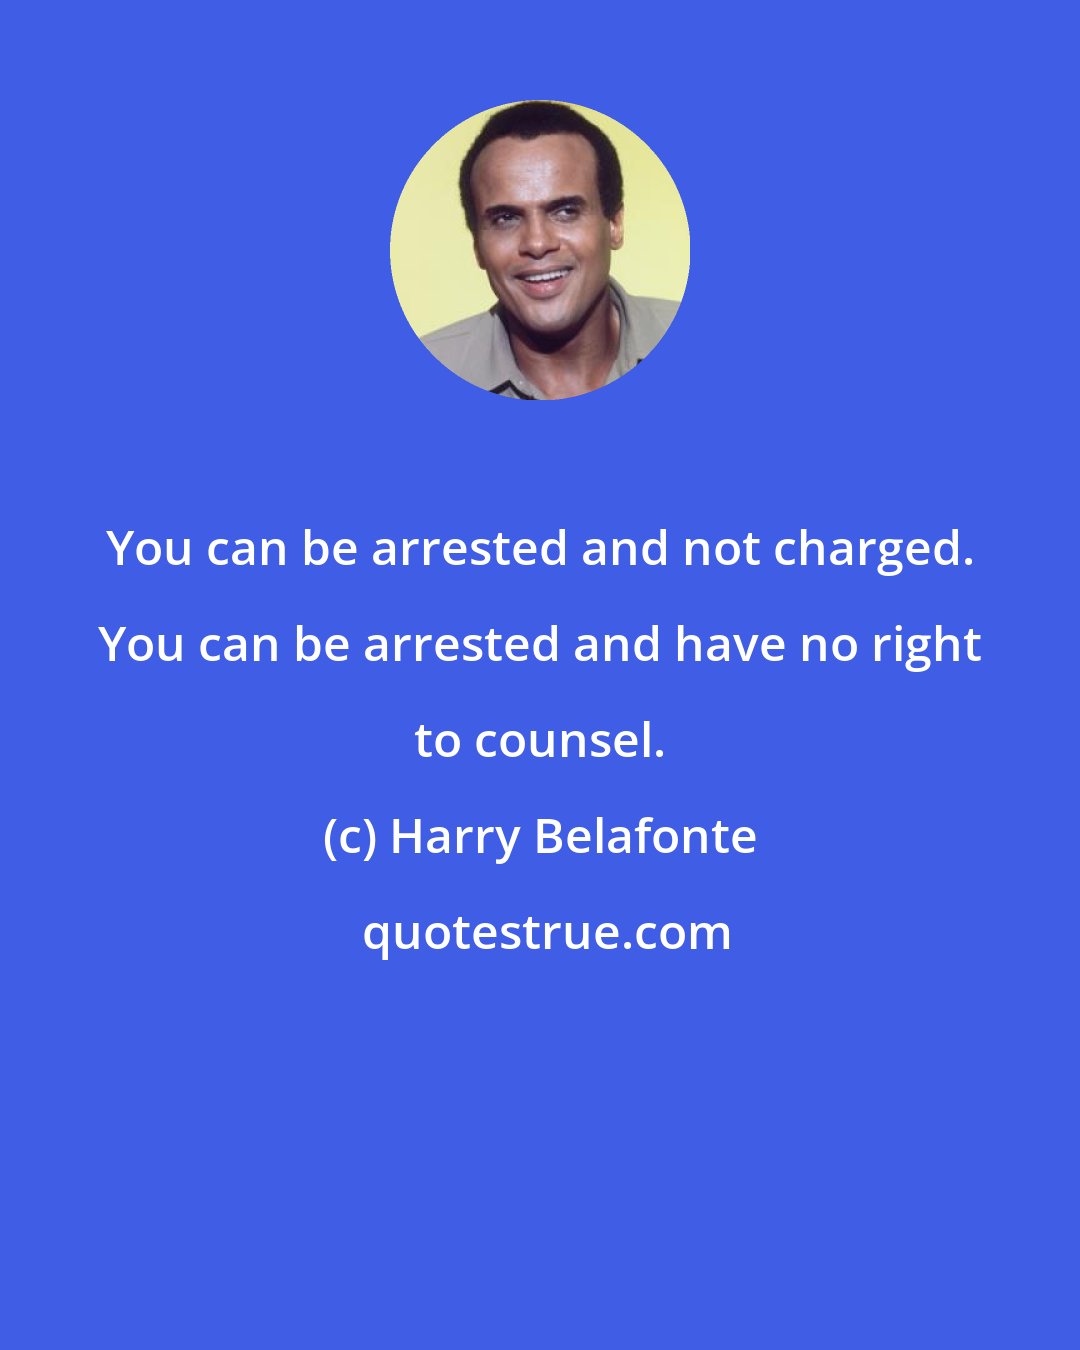 Harry Belafonte: You can be arrested and not charged. You can be arrested and have no right to counsel.